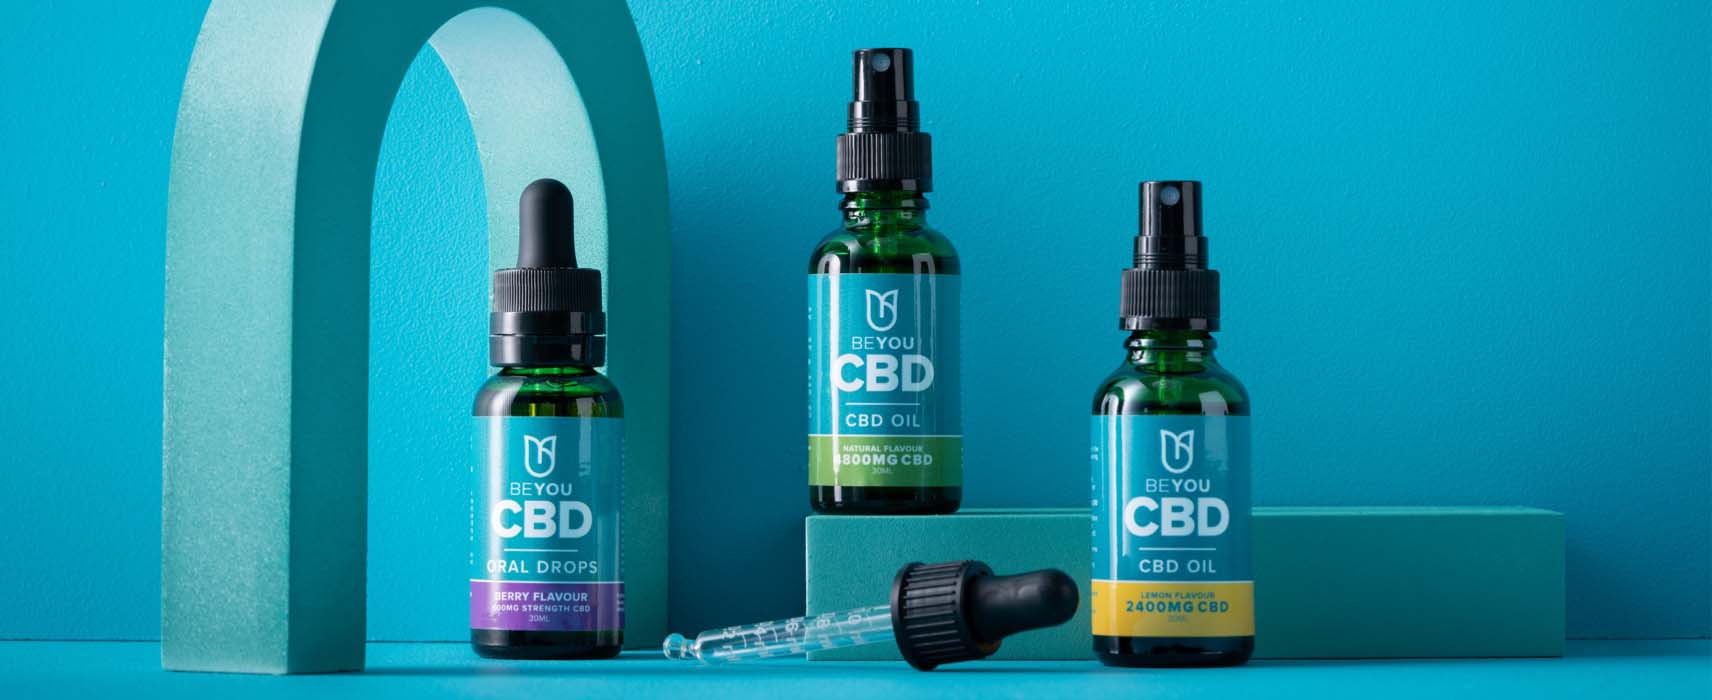 learn about the best CBD oil drops and CBD oil sprays available in the UK